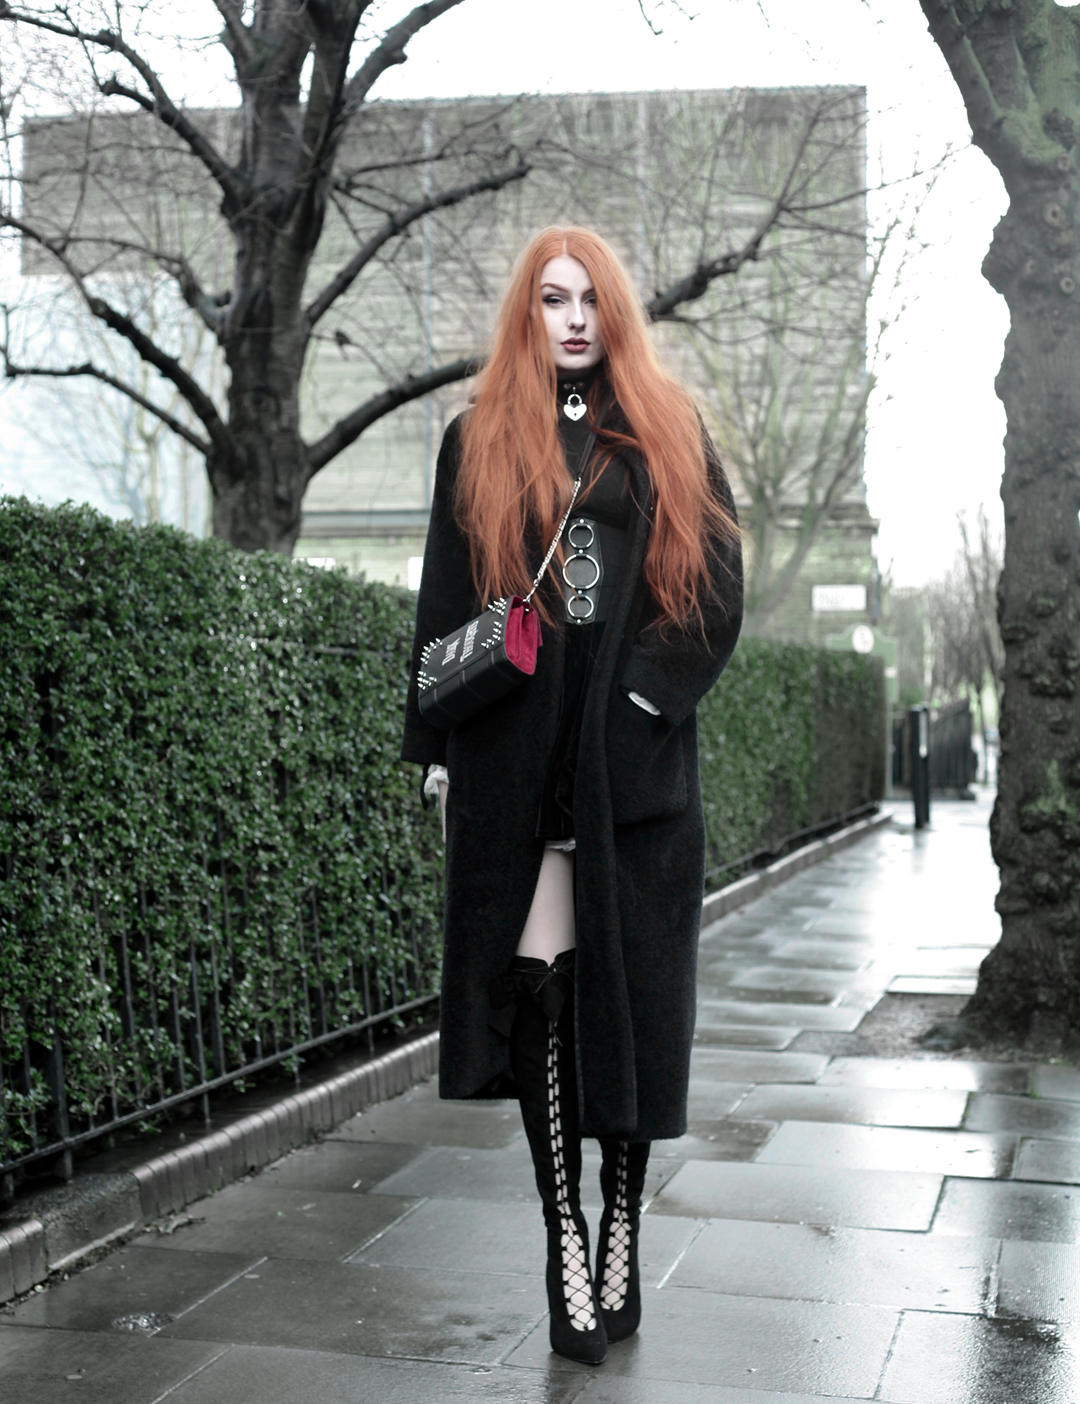 Olivia Emily wears Skinny Bags Dark Thoughts Book Clutch, Vintage Max Mara coat, and Asos Lace Up Boots